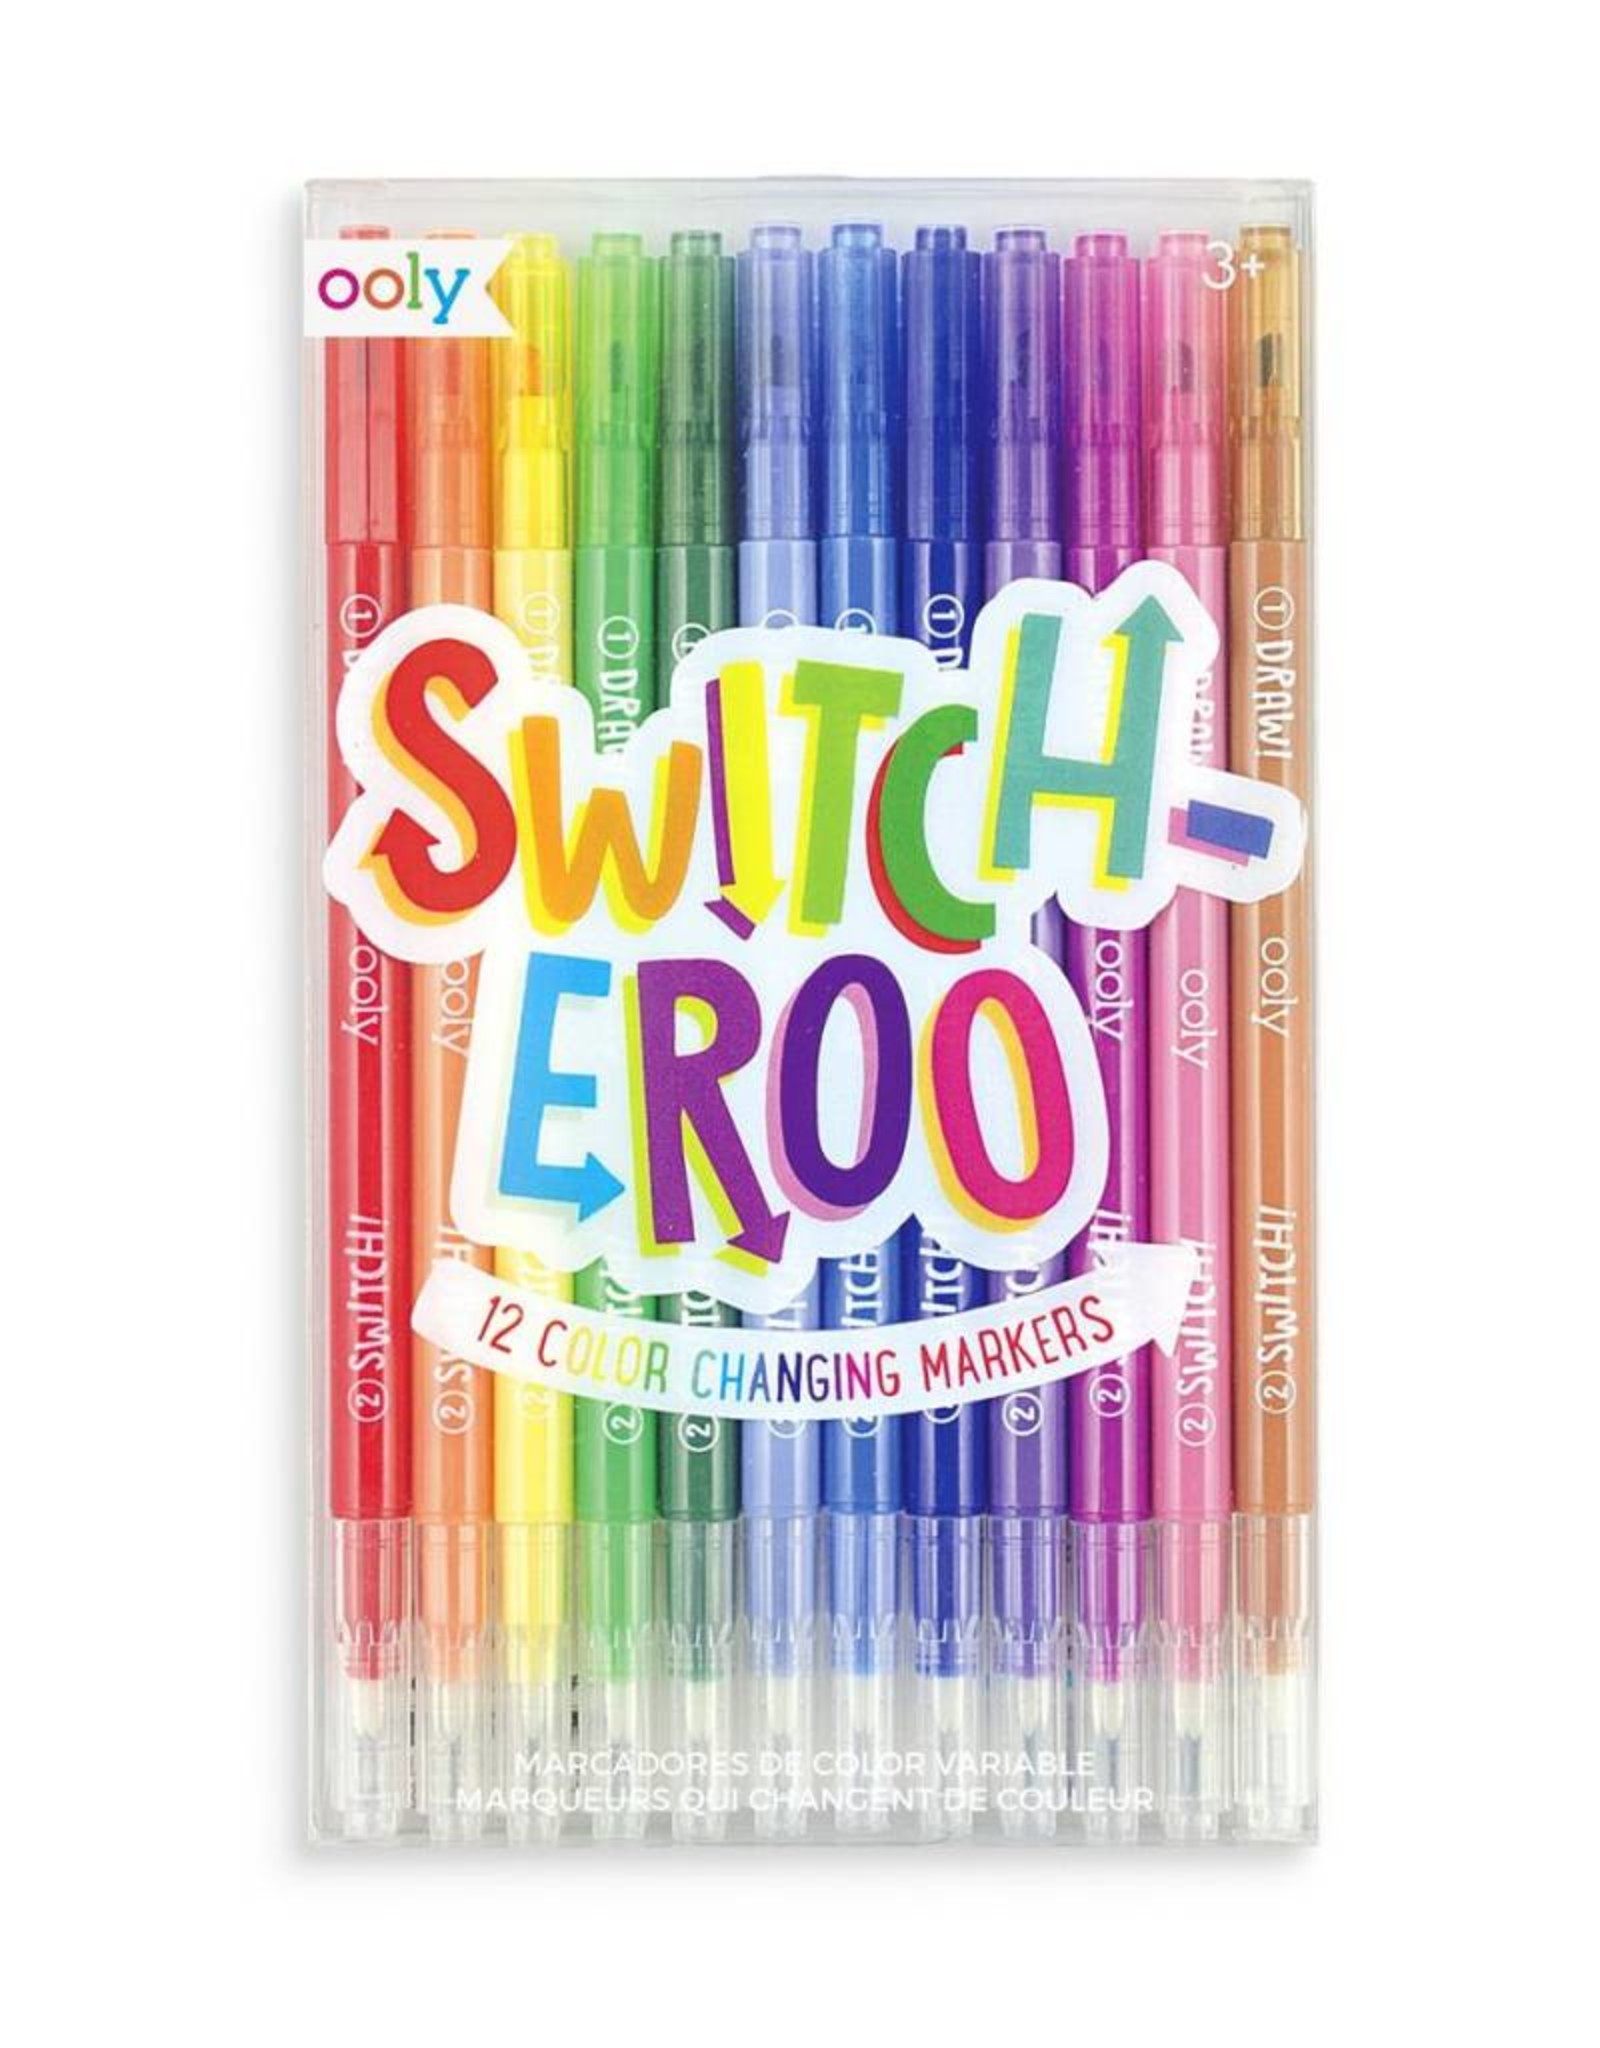 OOLY switch-eroo color changing markers